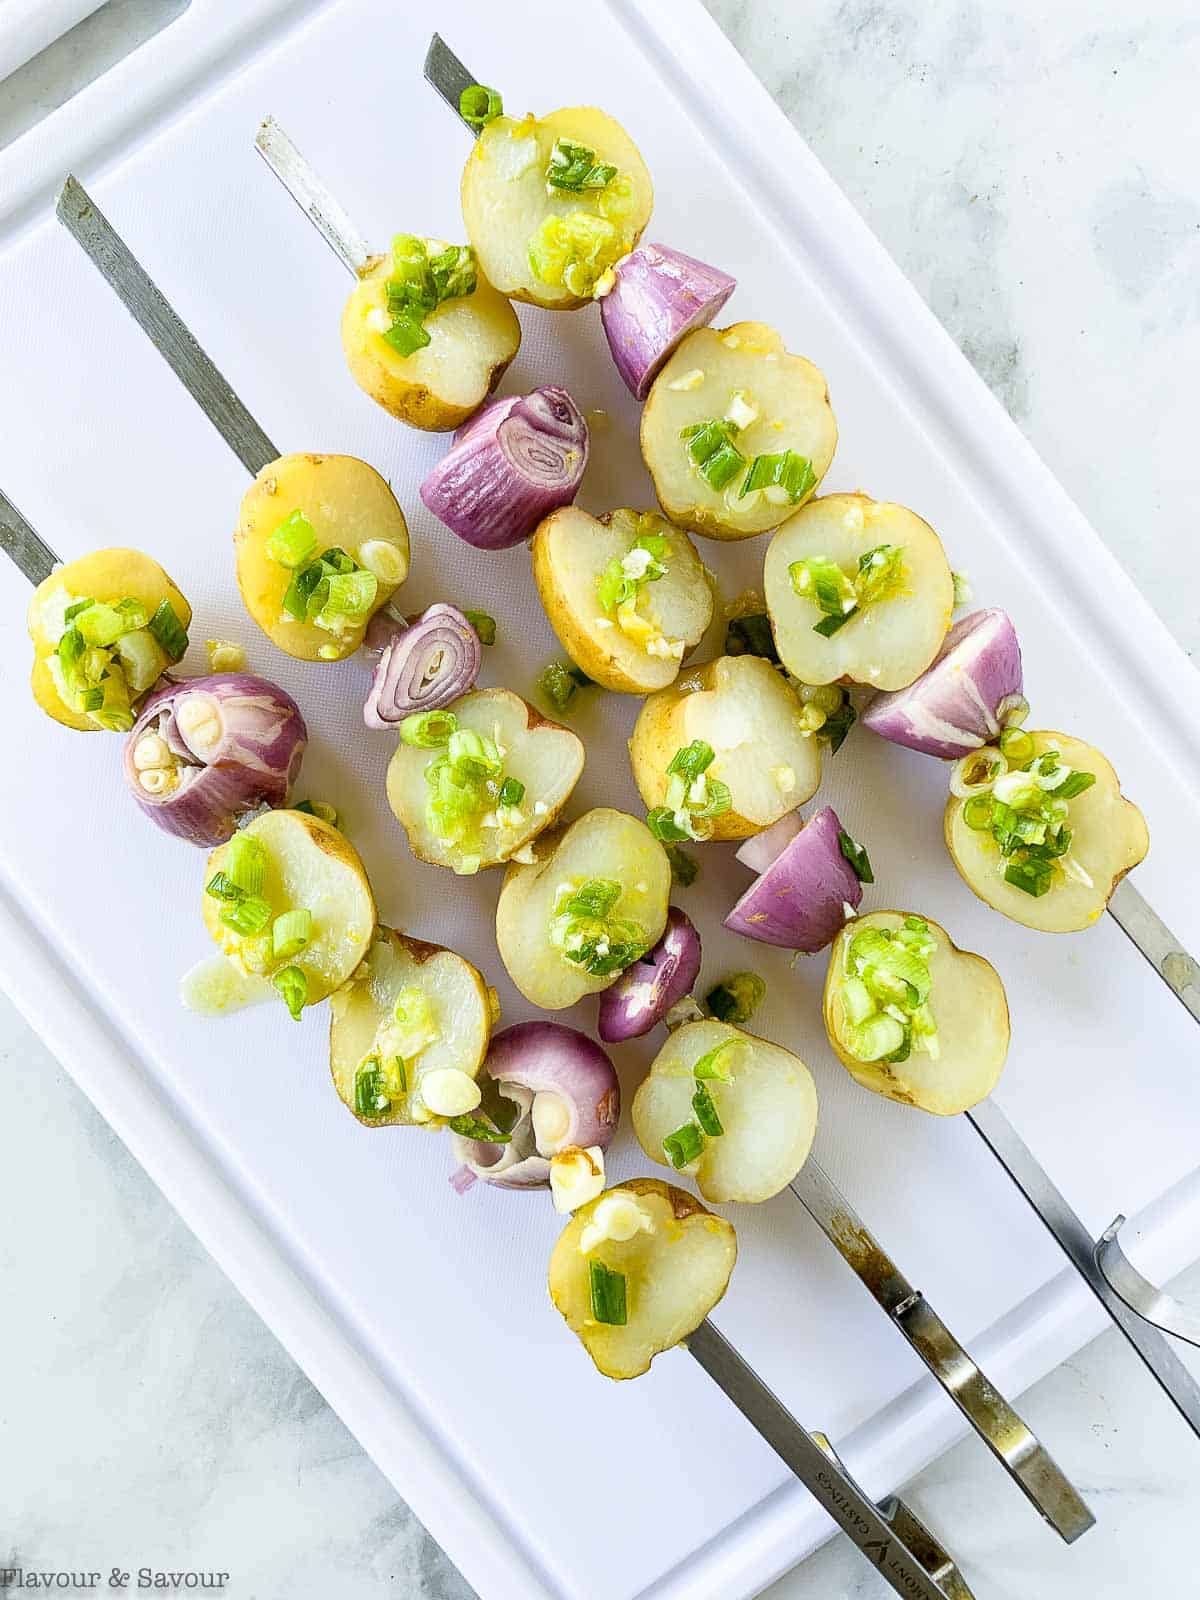 potatoes and shallots on skewers